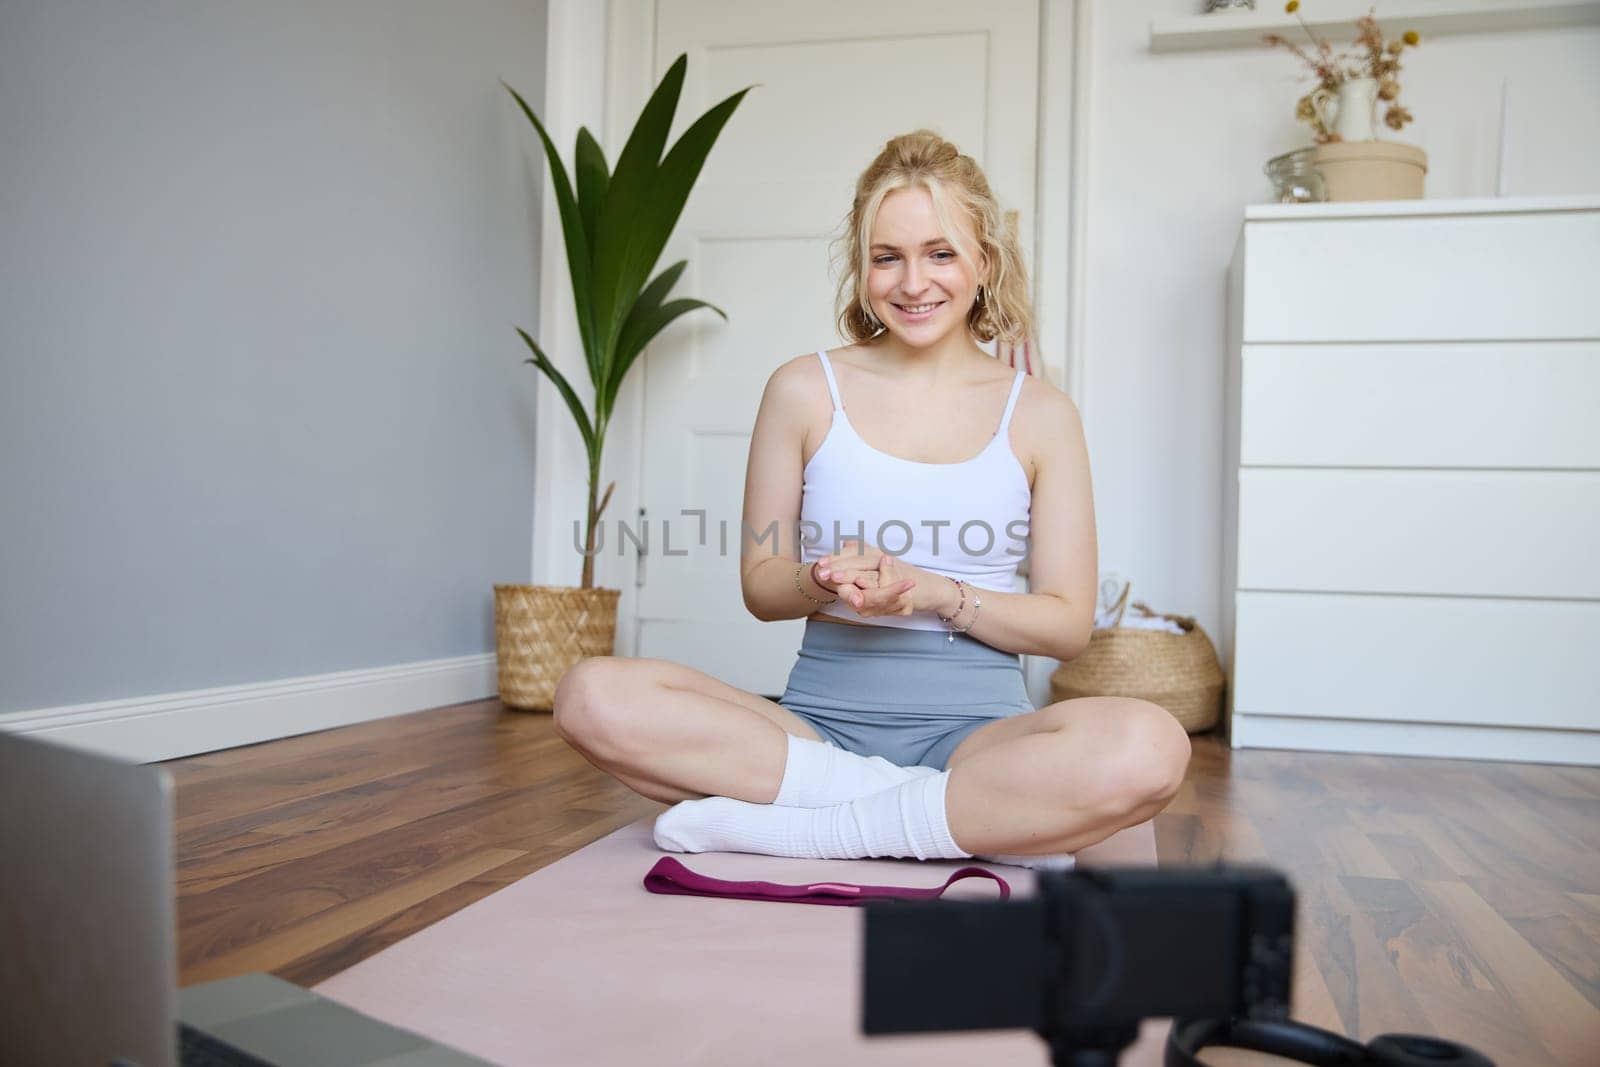 Portrait of young charismatic fitness trainer, girl blogger records video on digital camera, talks about health and workout, doing exercises on rubber mat in a room at home.